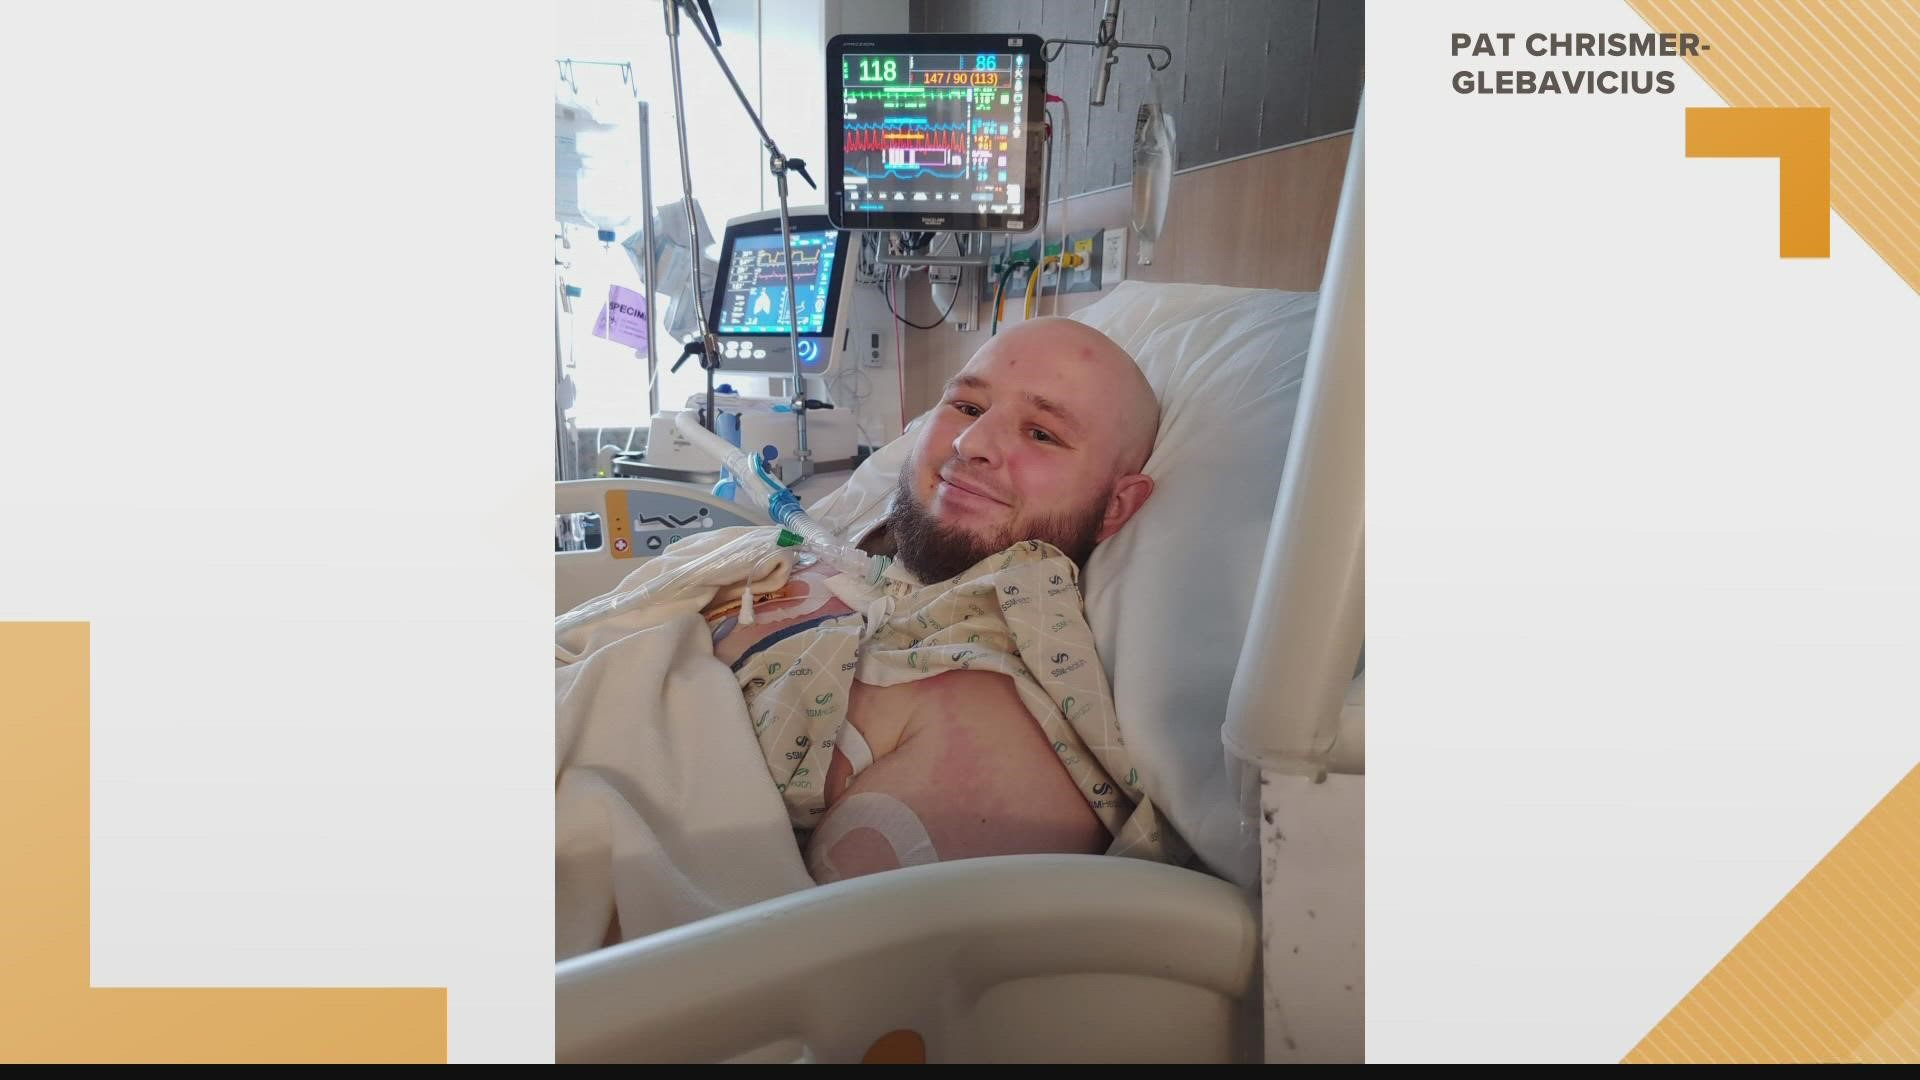 Brian Glebavicius has been hospitalized with COVID since November. Now he's at Barnes Jewish Hospital waiting for a double lung transplant that will save his life.